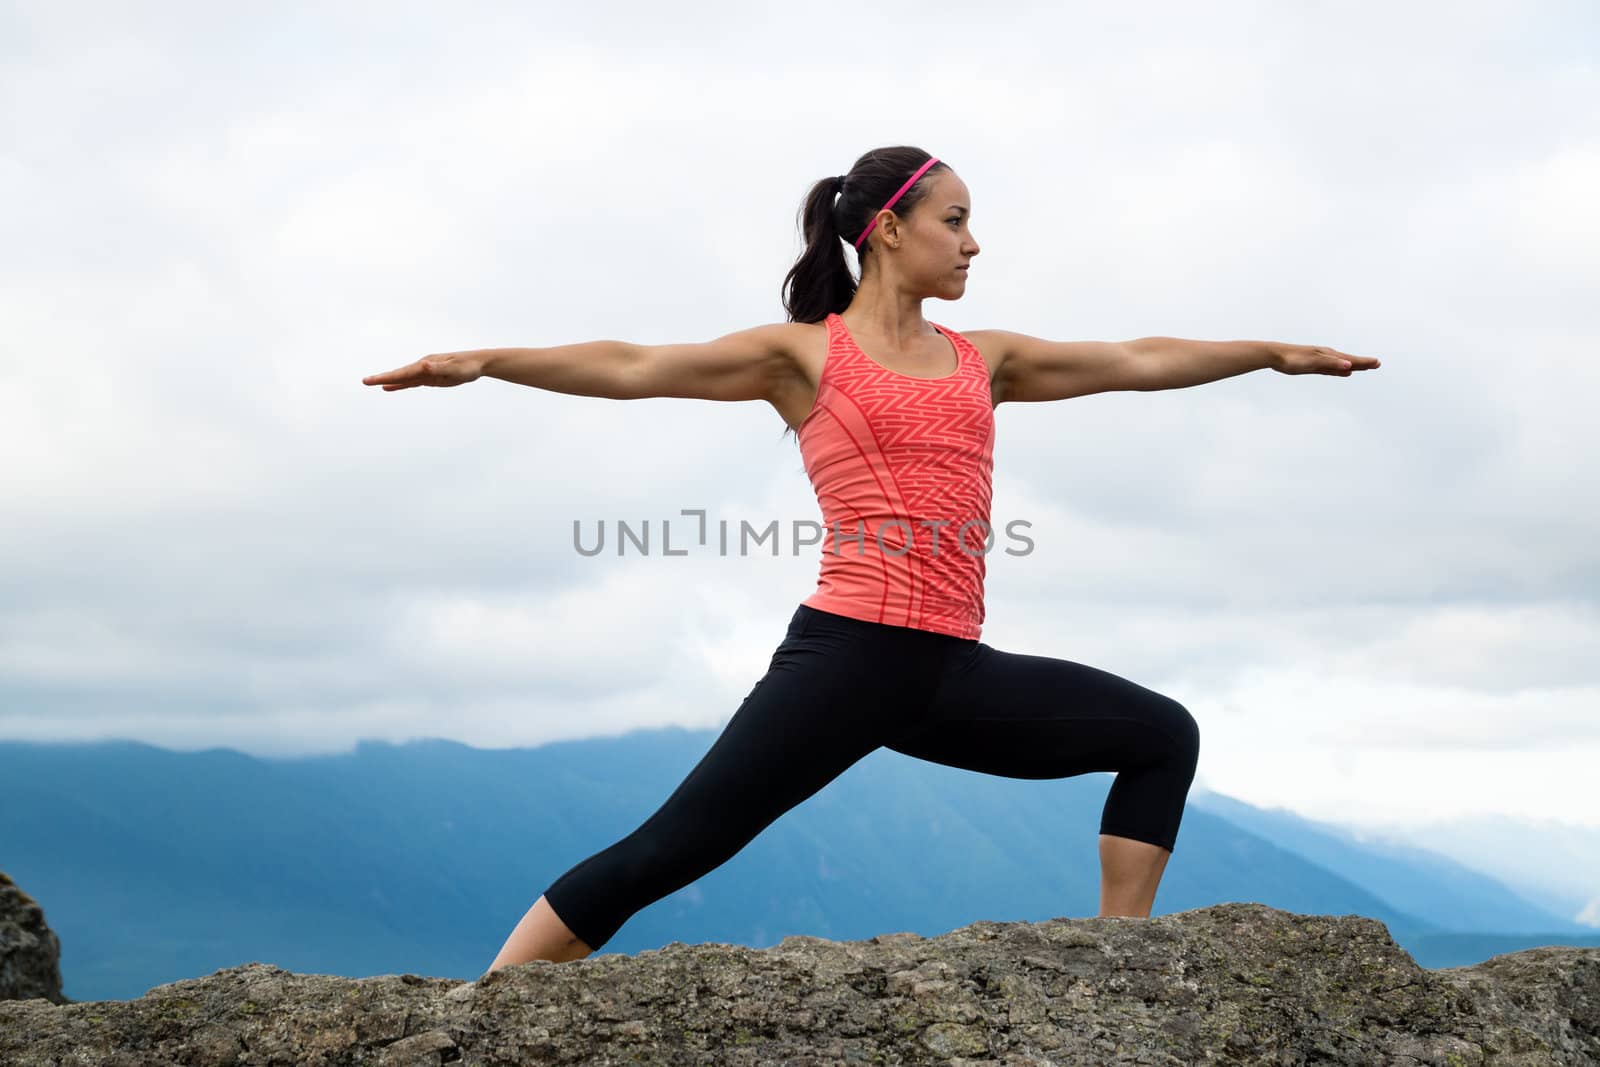 Young woman in yoga pose on top of mountain with beautiful vista in background.